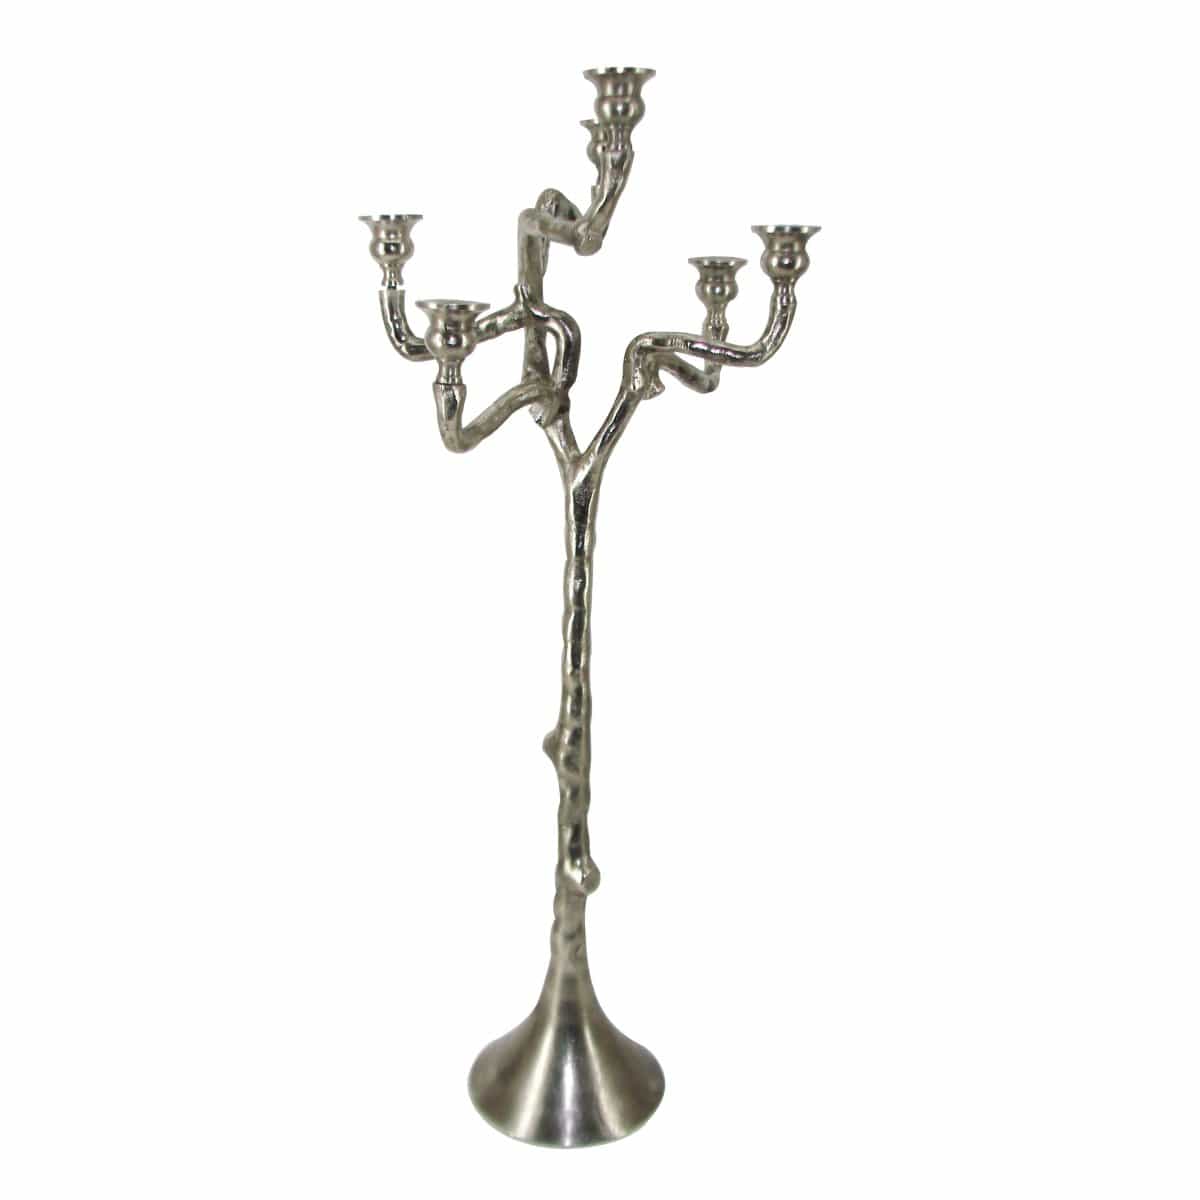 AB-35931 Stavros Aluminium Candle Holder, Tall picket and rail